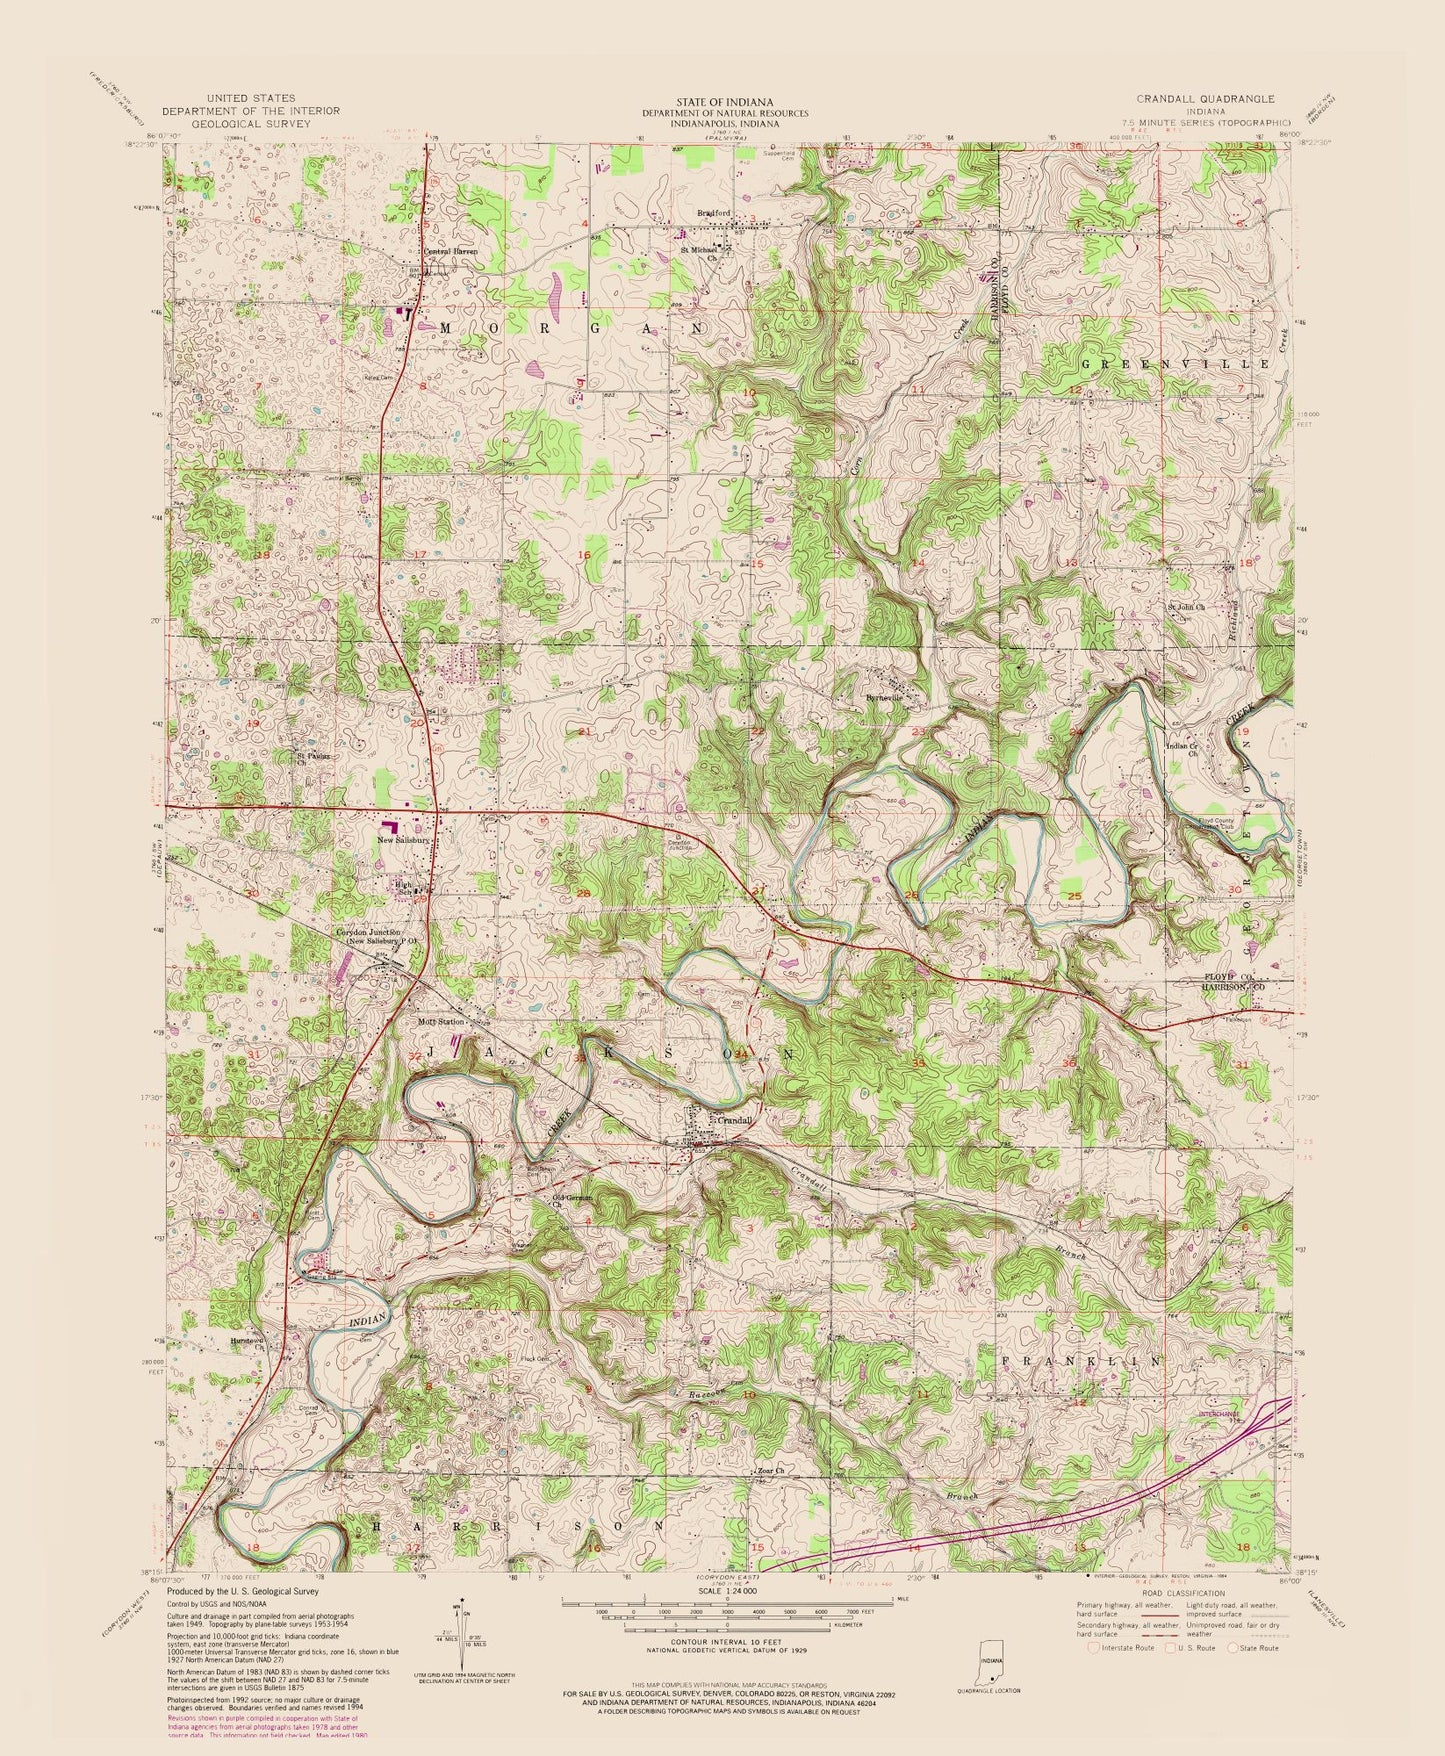 Topographical Map - Crandall Indiana Quad - USGS 1954 - 23 x 27.95 - Vintage Wall Art